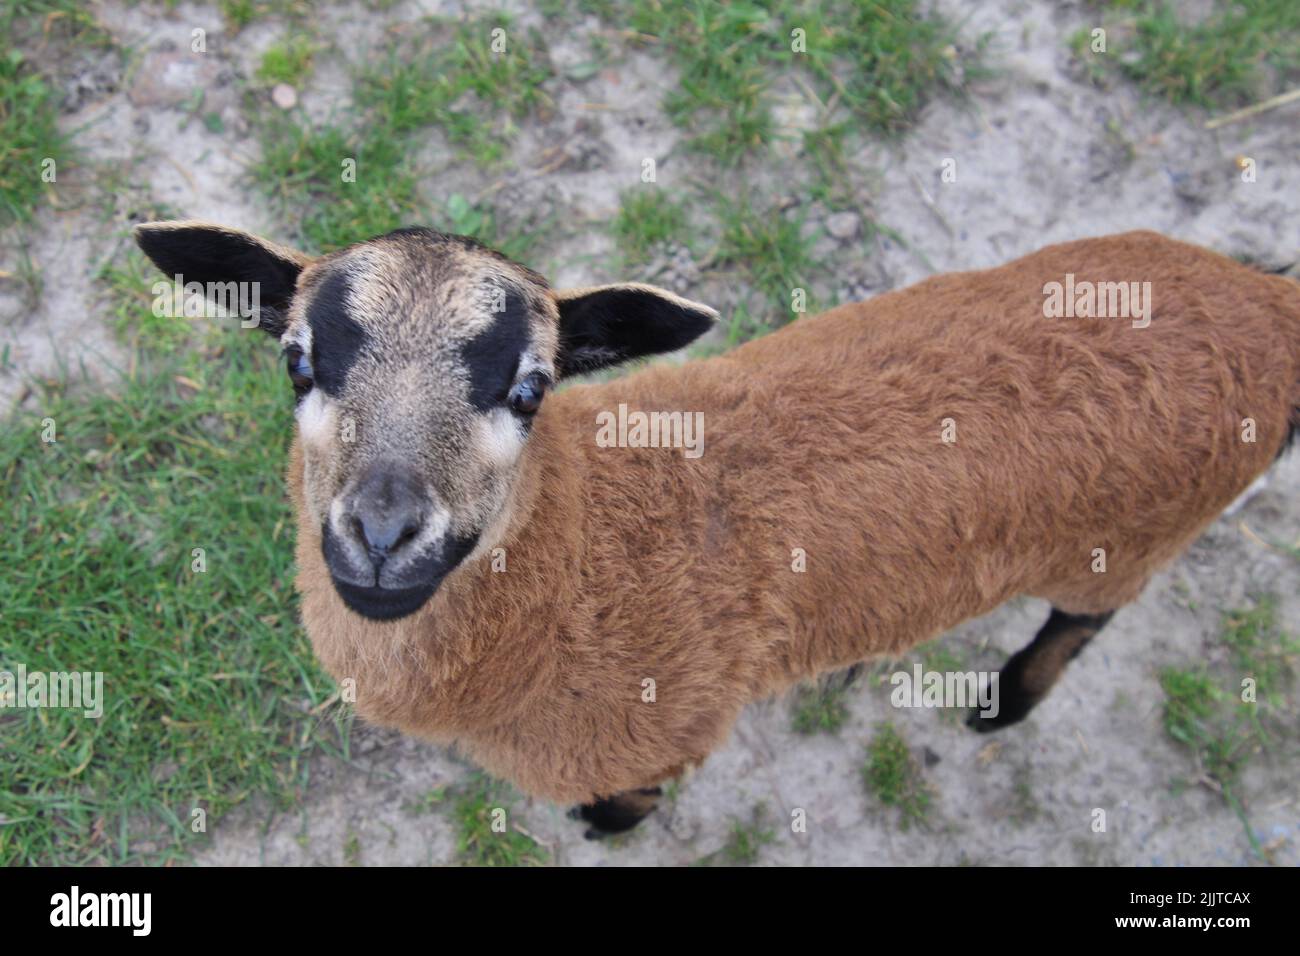 A closeup of a Cameroon sheep from above Stock Photo